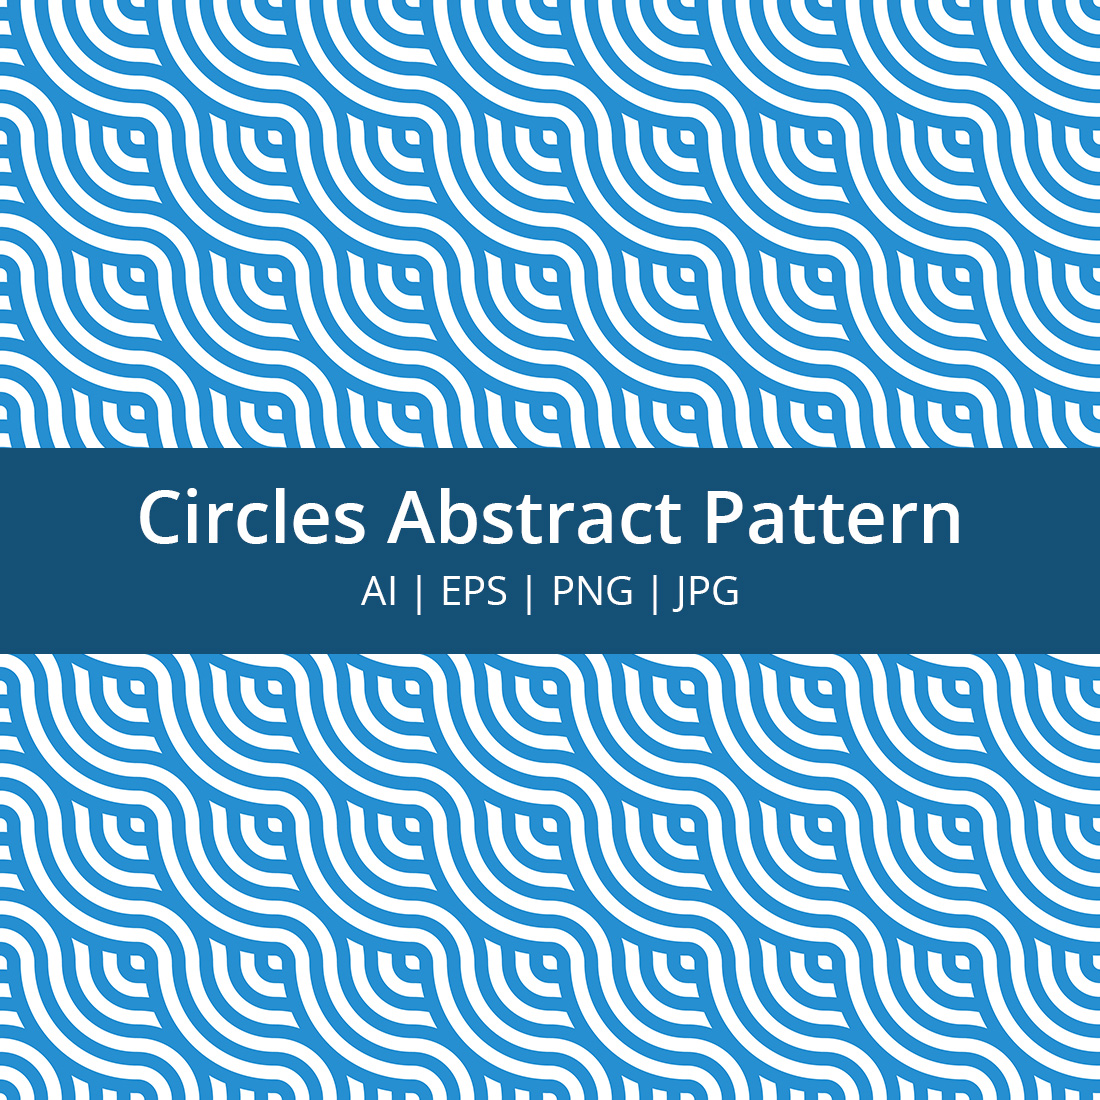 Blue and white pattern with the words circles abstract pattern.